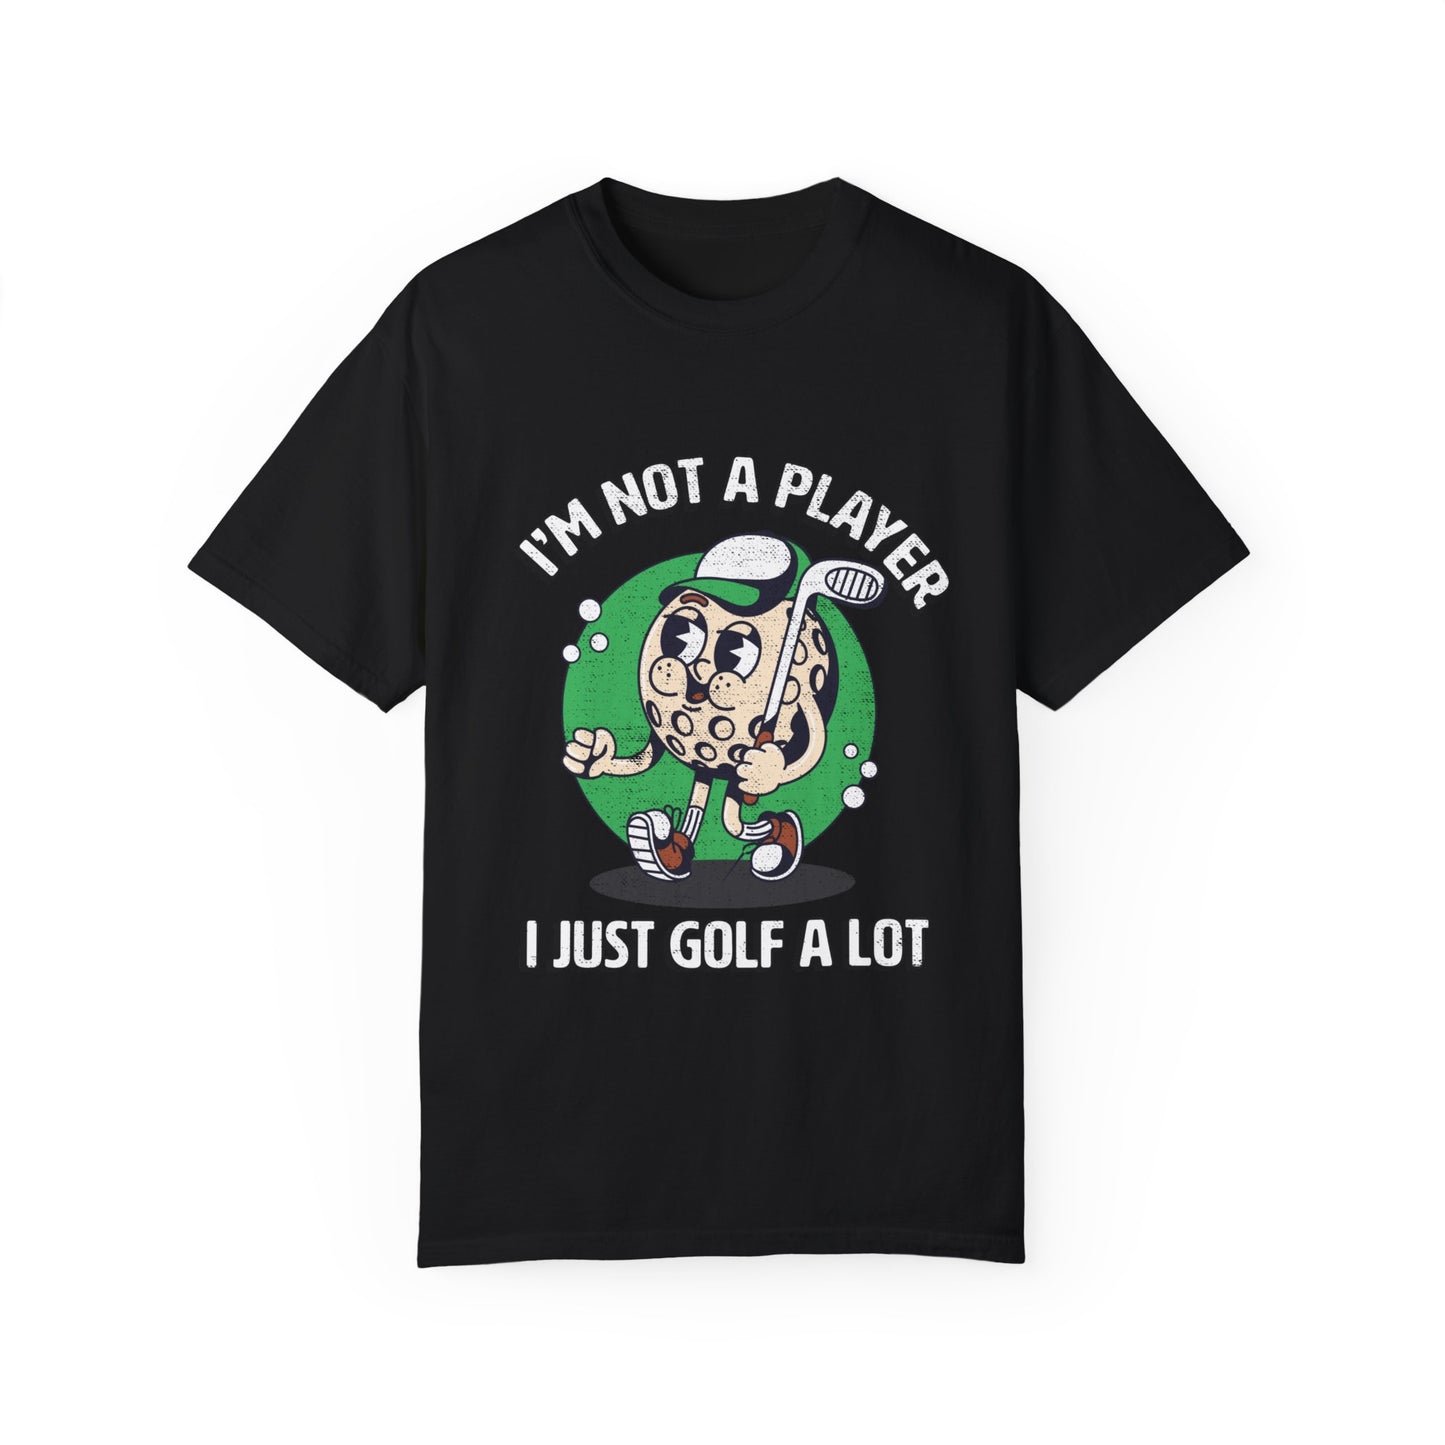 Funny Golf Shirt Unisex | Funny Graphic T-shirts | Golf Tee | Comfort Colors